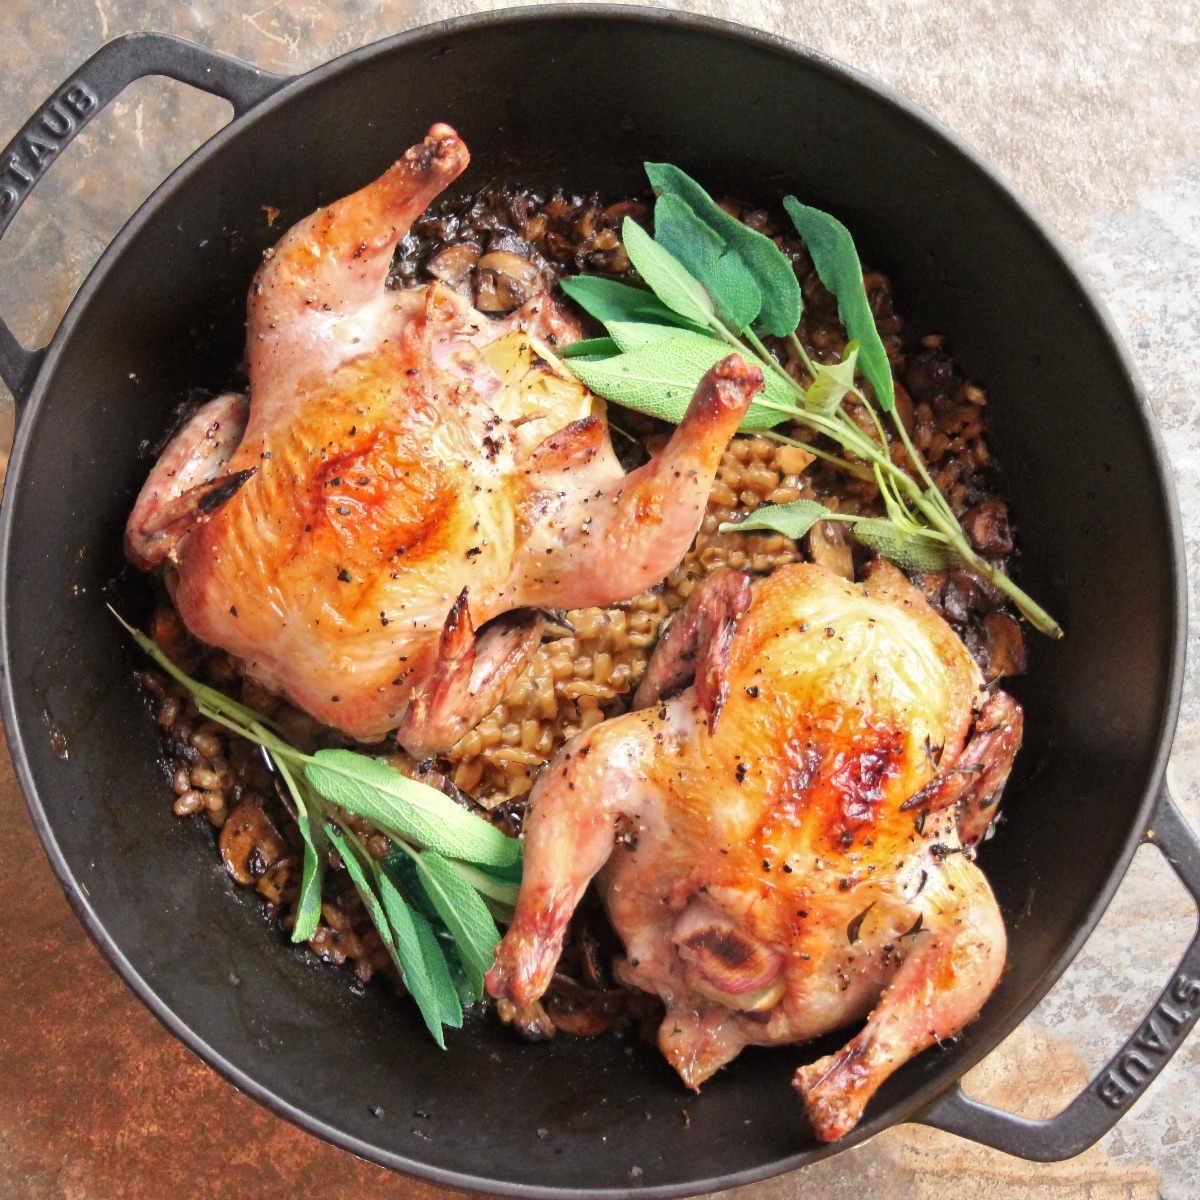 Two One-Pot Cornish Game Hens with Mushroom Barley Pilaf in a cast-iron skillet garnished with sprigs of sage.